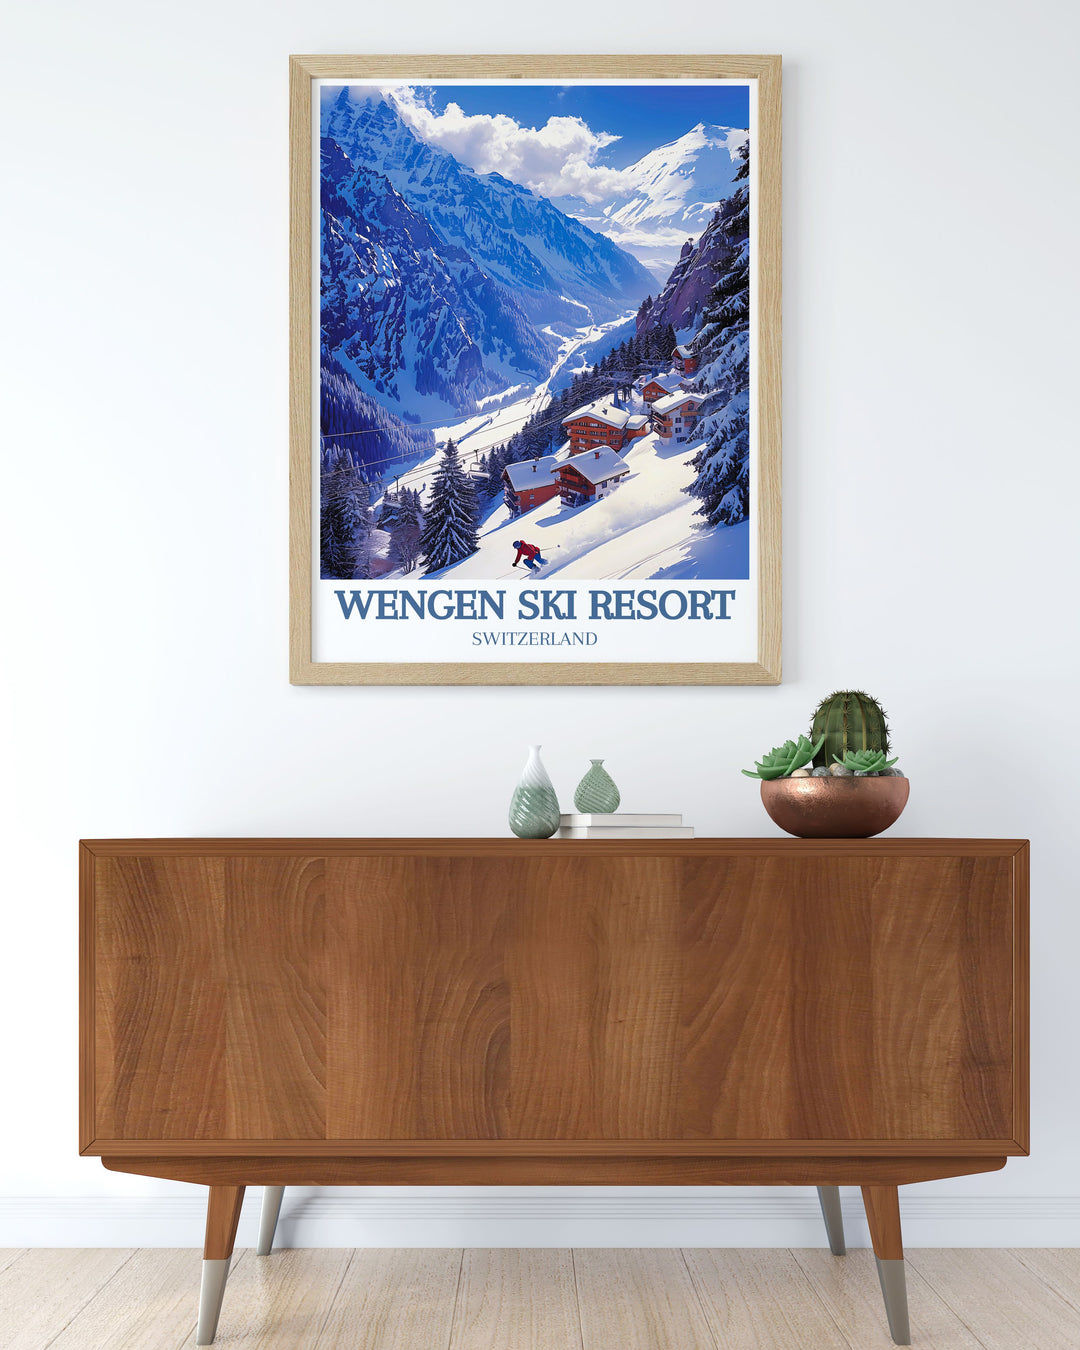 Exquisite gallery wall art of Wengen Ski Resort, capturing the charm of its snow covered chalets and scenic trails. This piece is perfect for creating a focal point that brings the serene beauty of the Swiss Alps into your home.